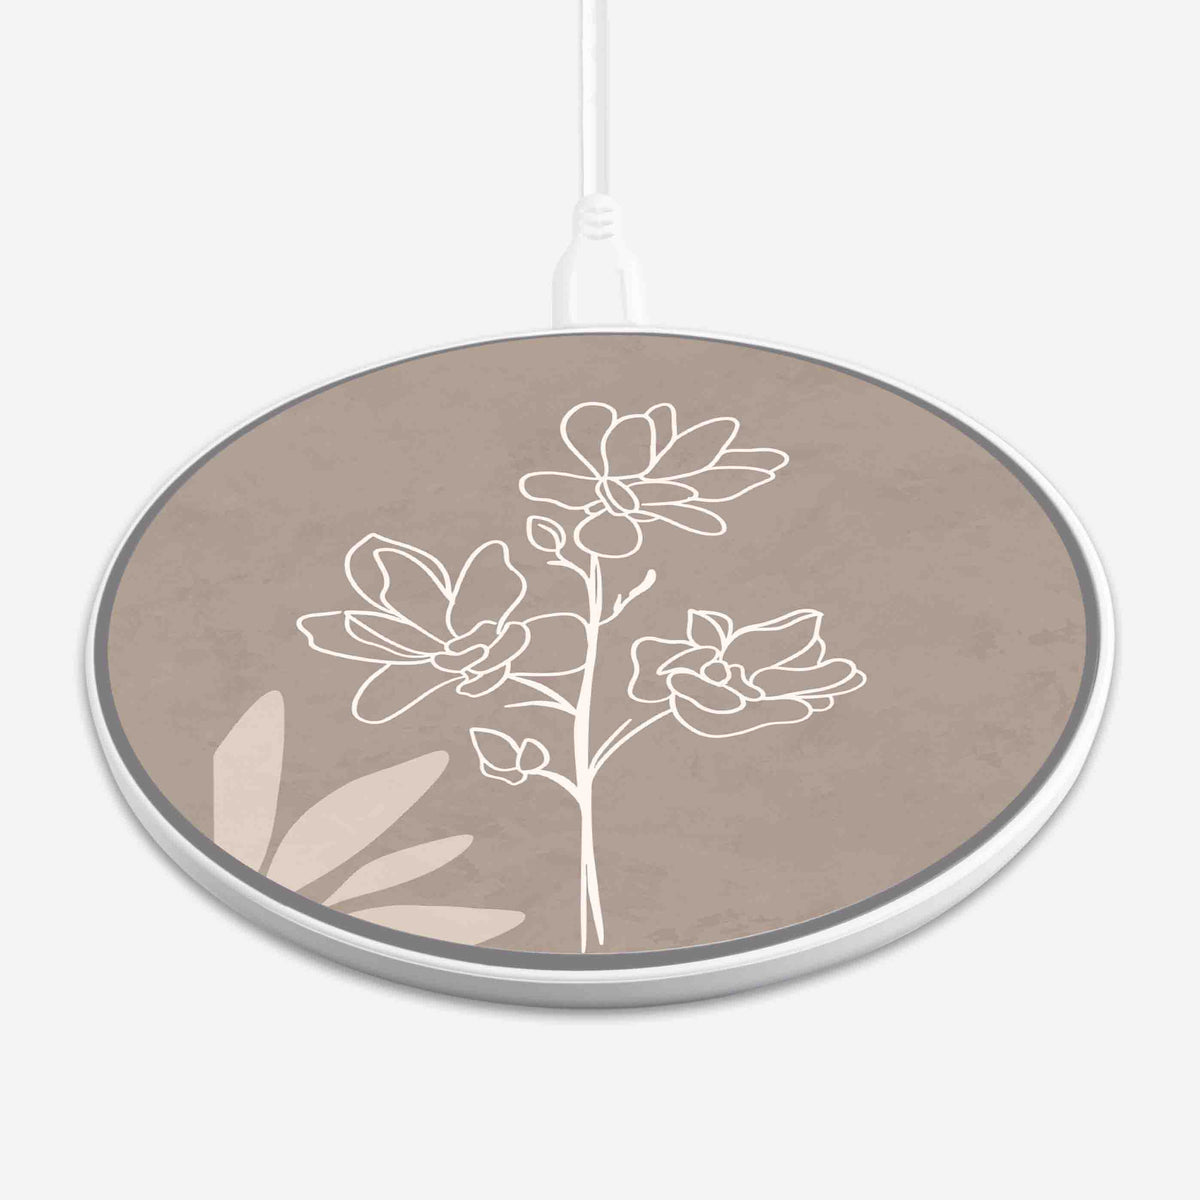 Wireless Charging Pad - In Bloom   Brown Flower Design (Front View)